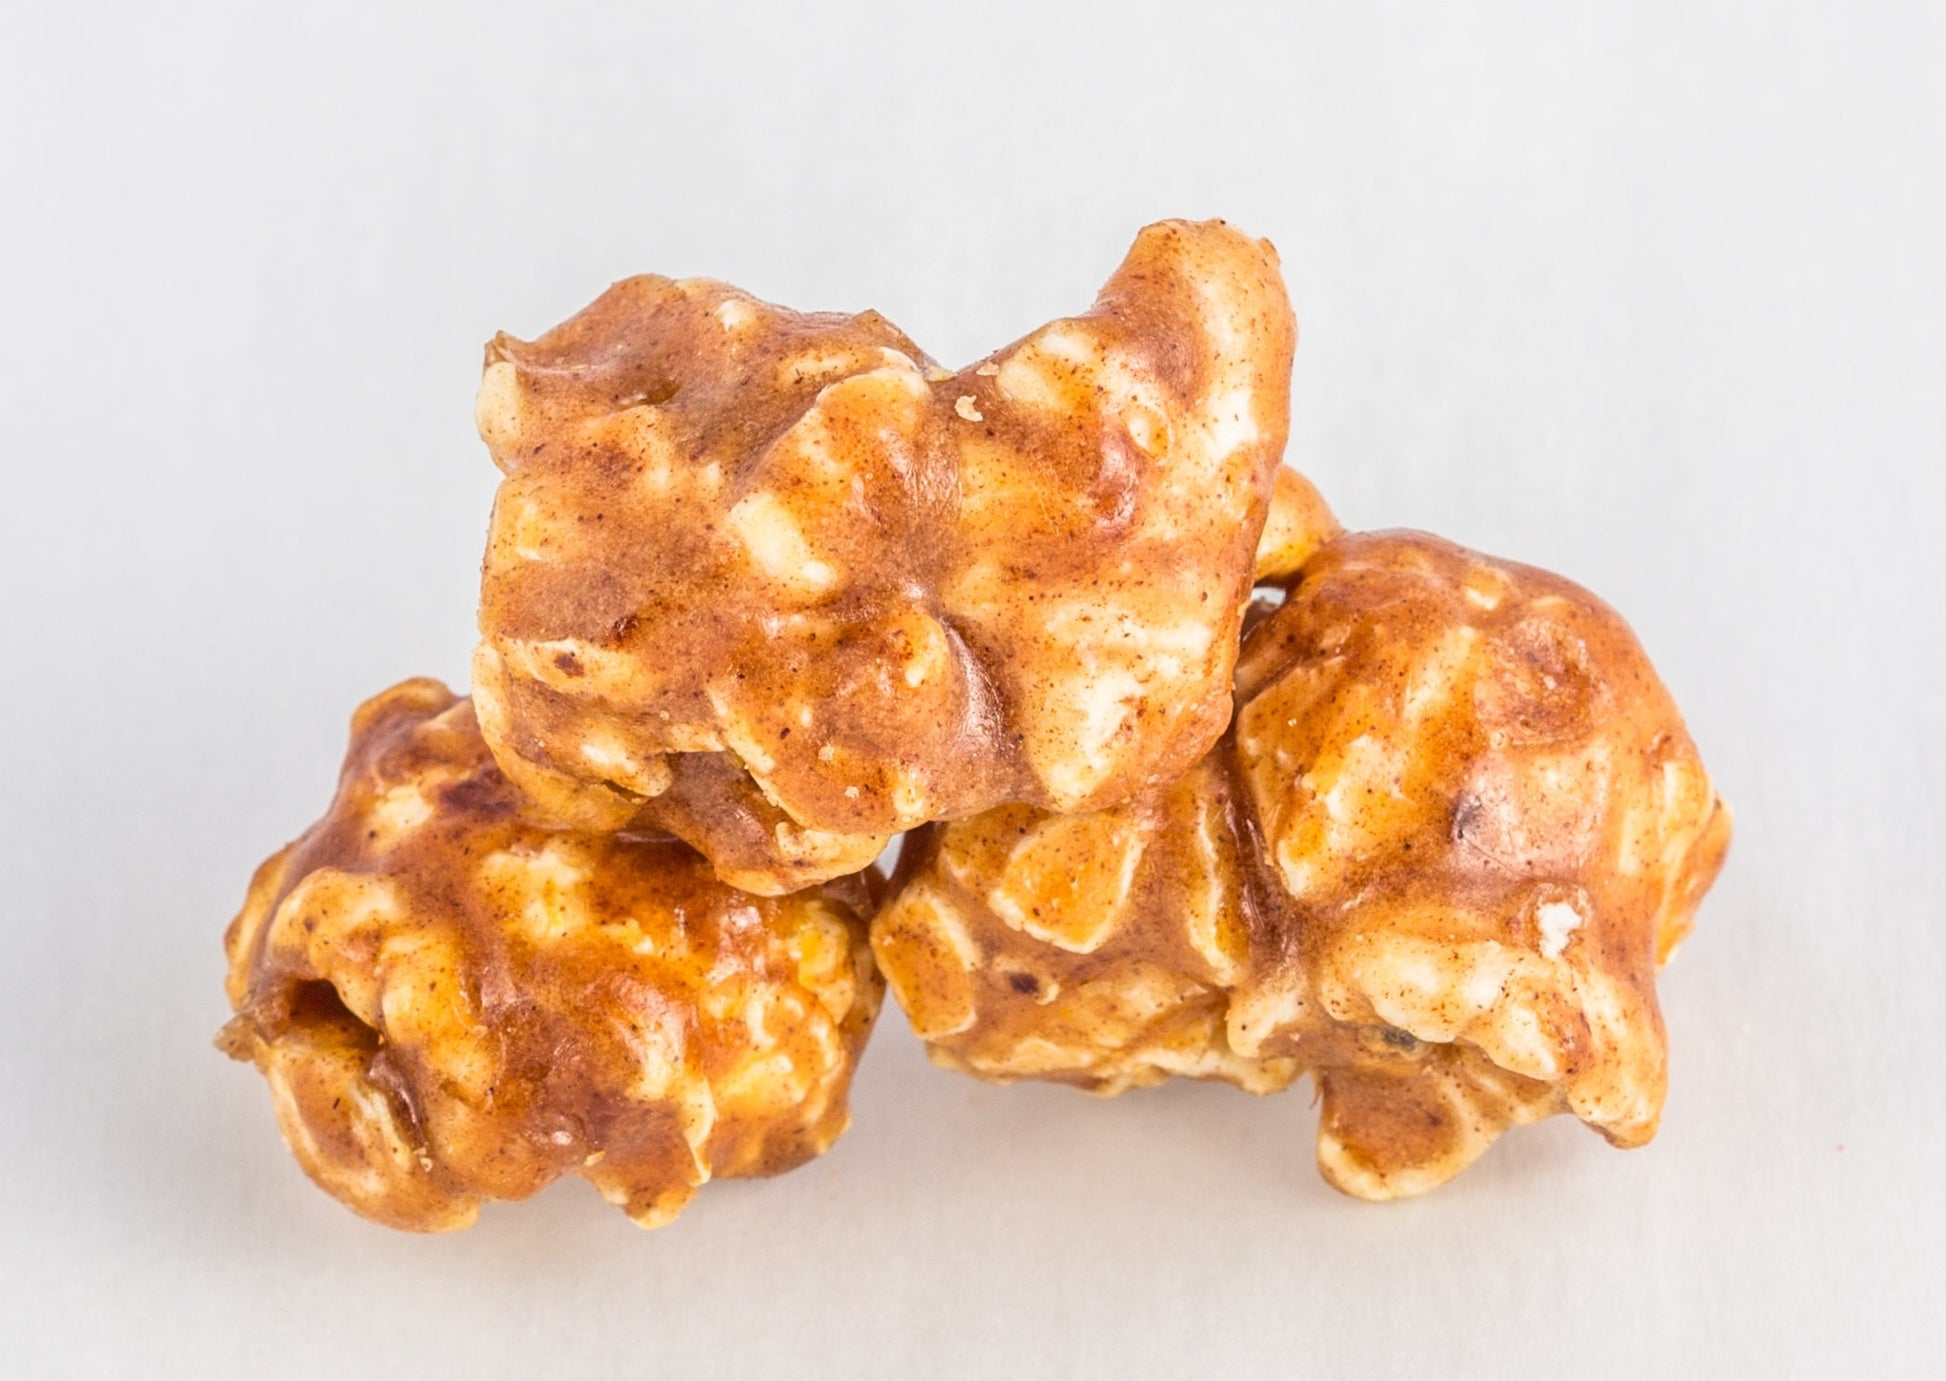 Three pieces of popcorn covered in caramelized with cinnamon.